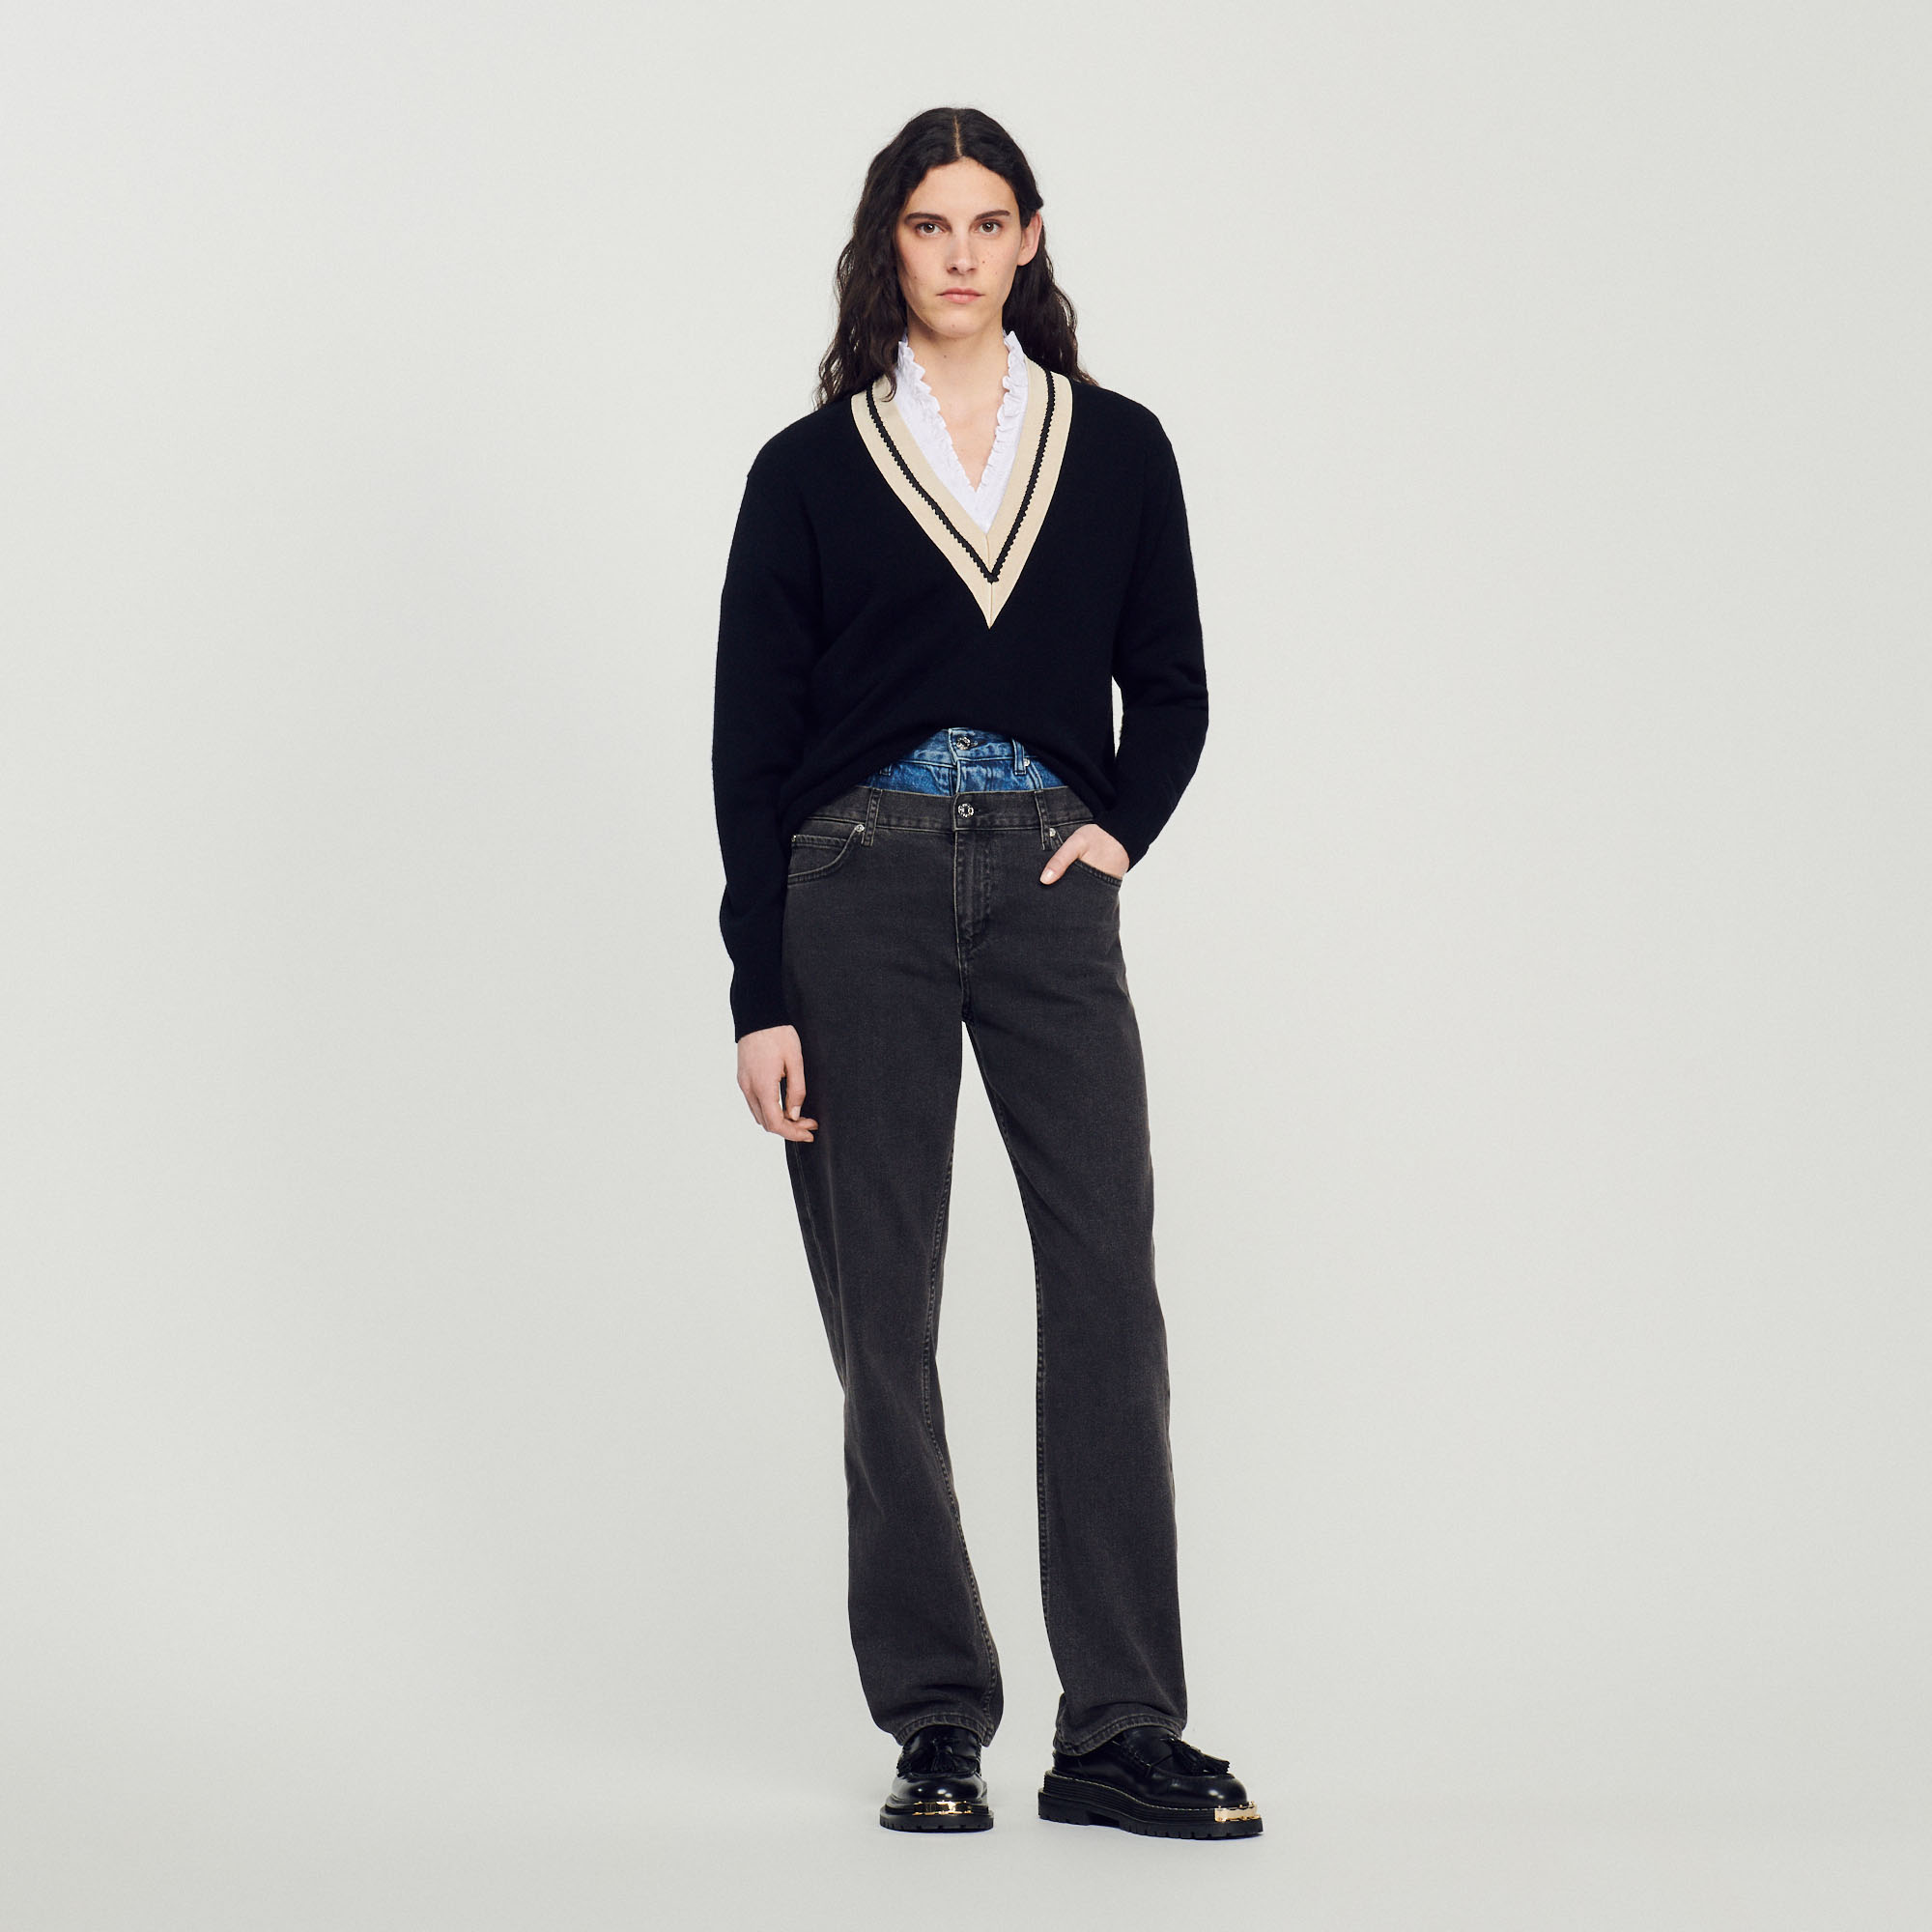 Sandro wool Knit sweater with contrasting deep V-neck and long sleeves